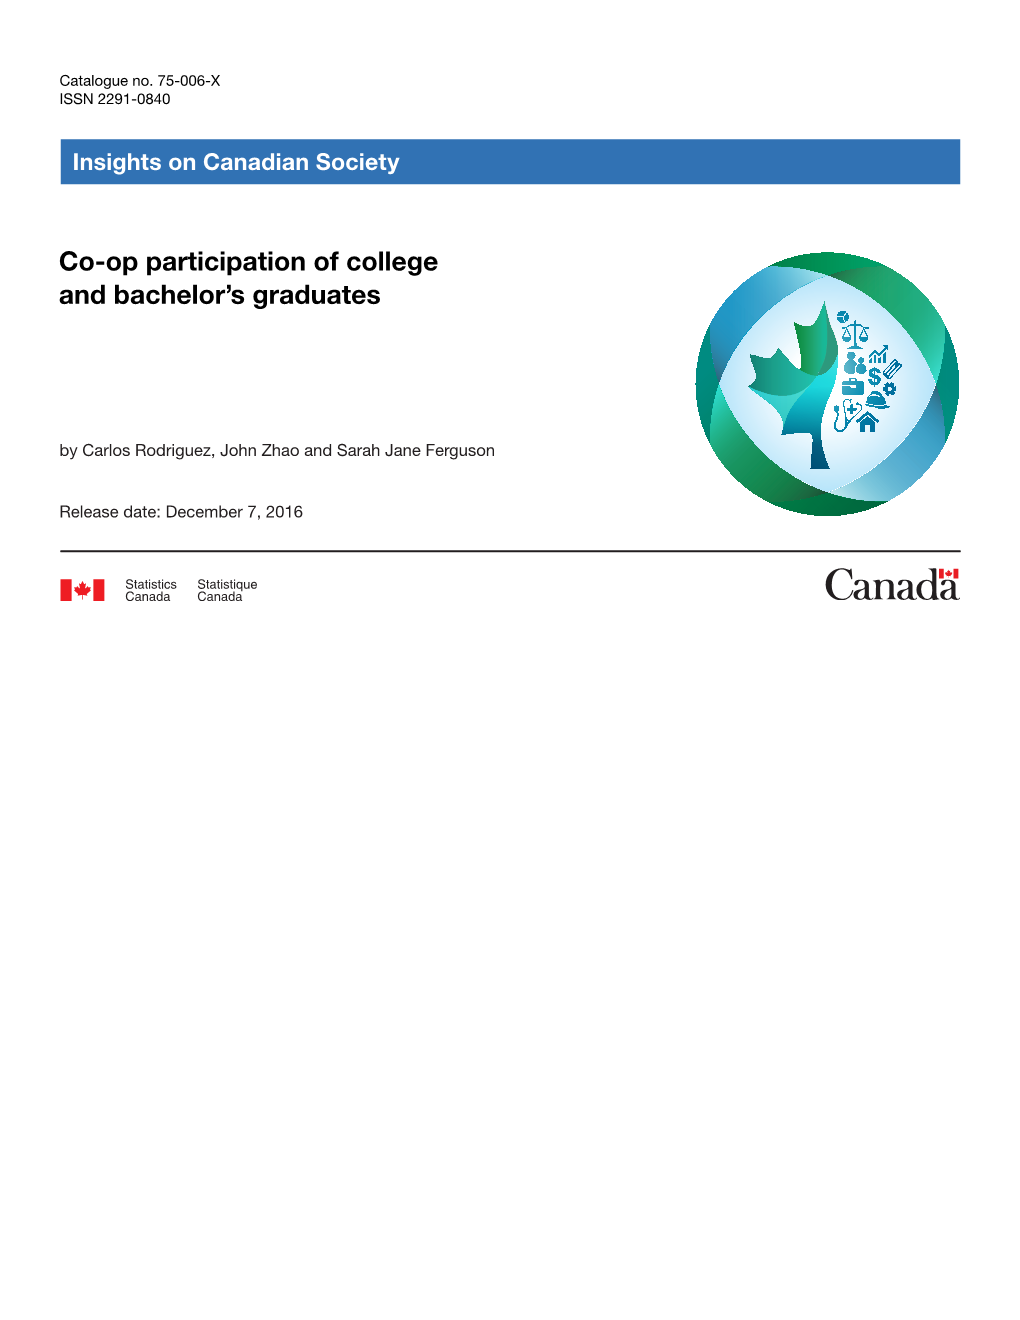 Co-Op Participation of College and Bachelor's Graduates